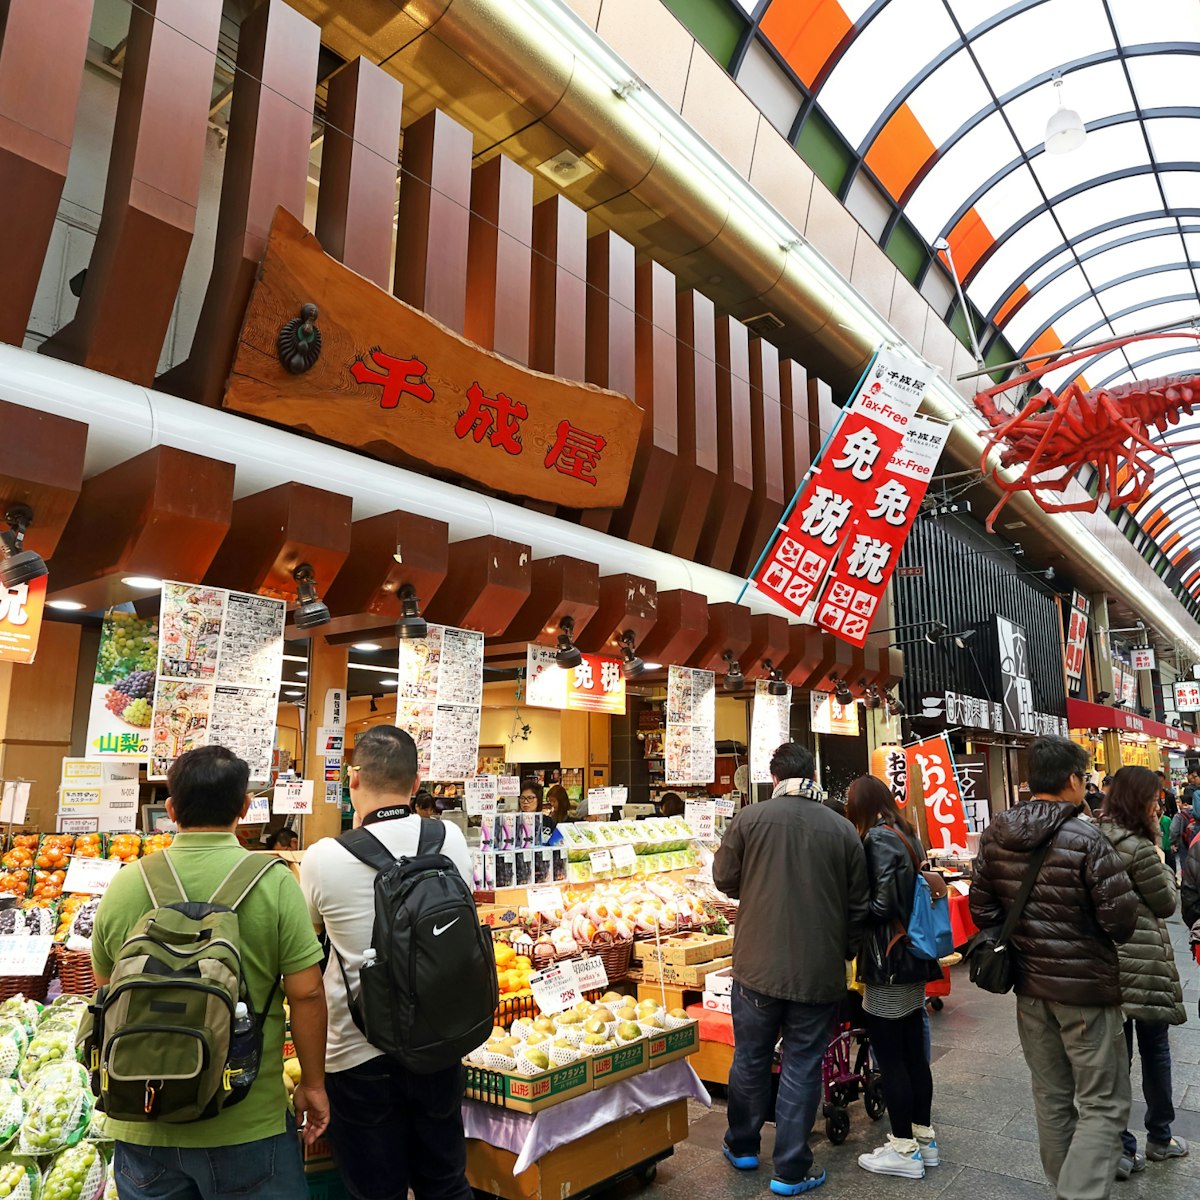 OSAKA, JAPAN - NOV 6: Tourists shopping and visit  in Kuromon Ichiba market on November 6, 2015 in Osaka, Japan. it is market places popular of Osaka; Shutterstock ID 413962024; Your name (First / Last): Laura Crawford; GL account no.: 65050; Netsuite department name: Online Editorial; Full Product or Project name including edition: Osaka city app POI images